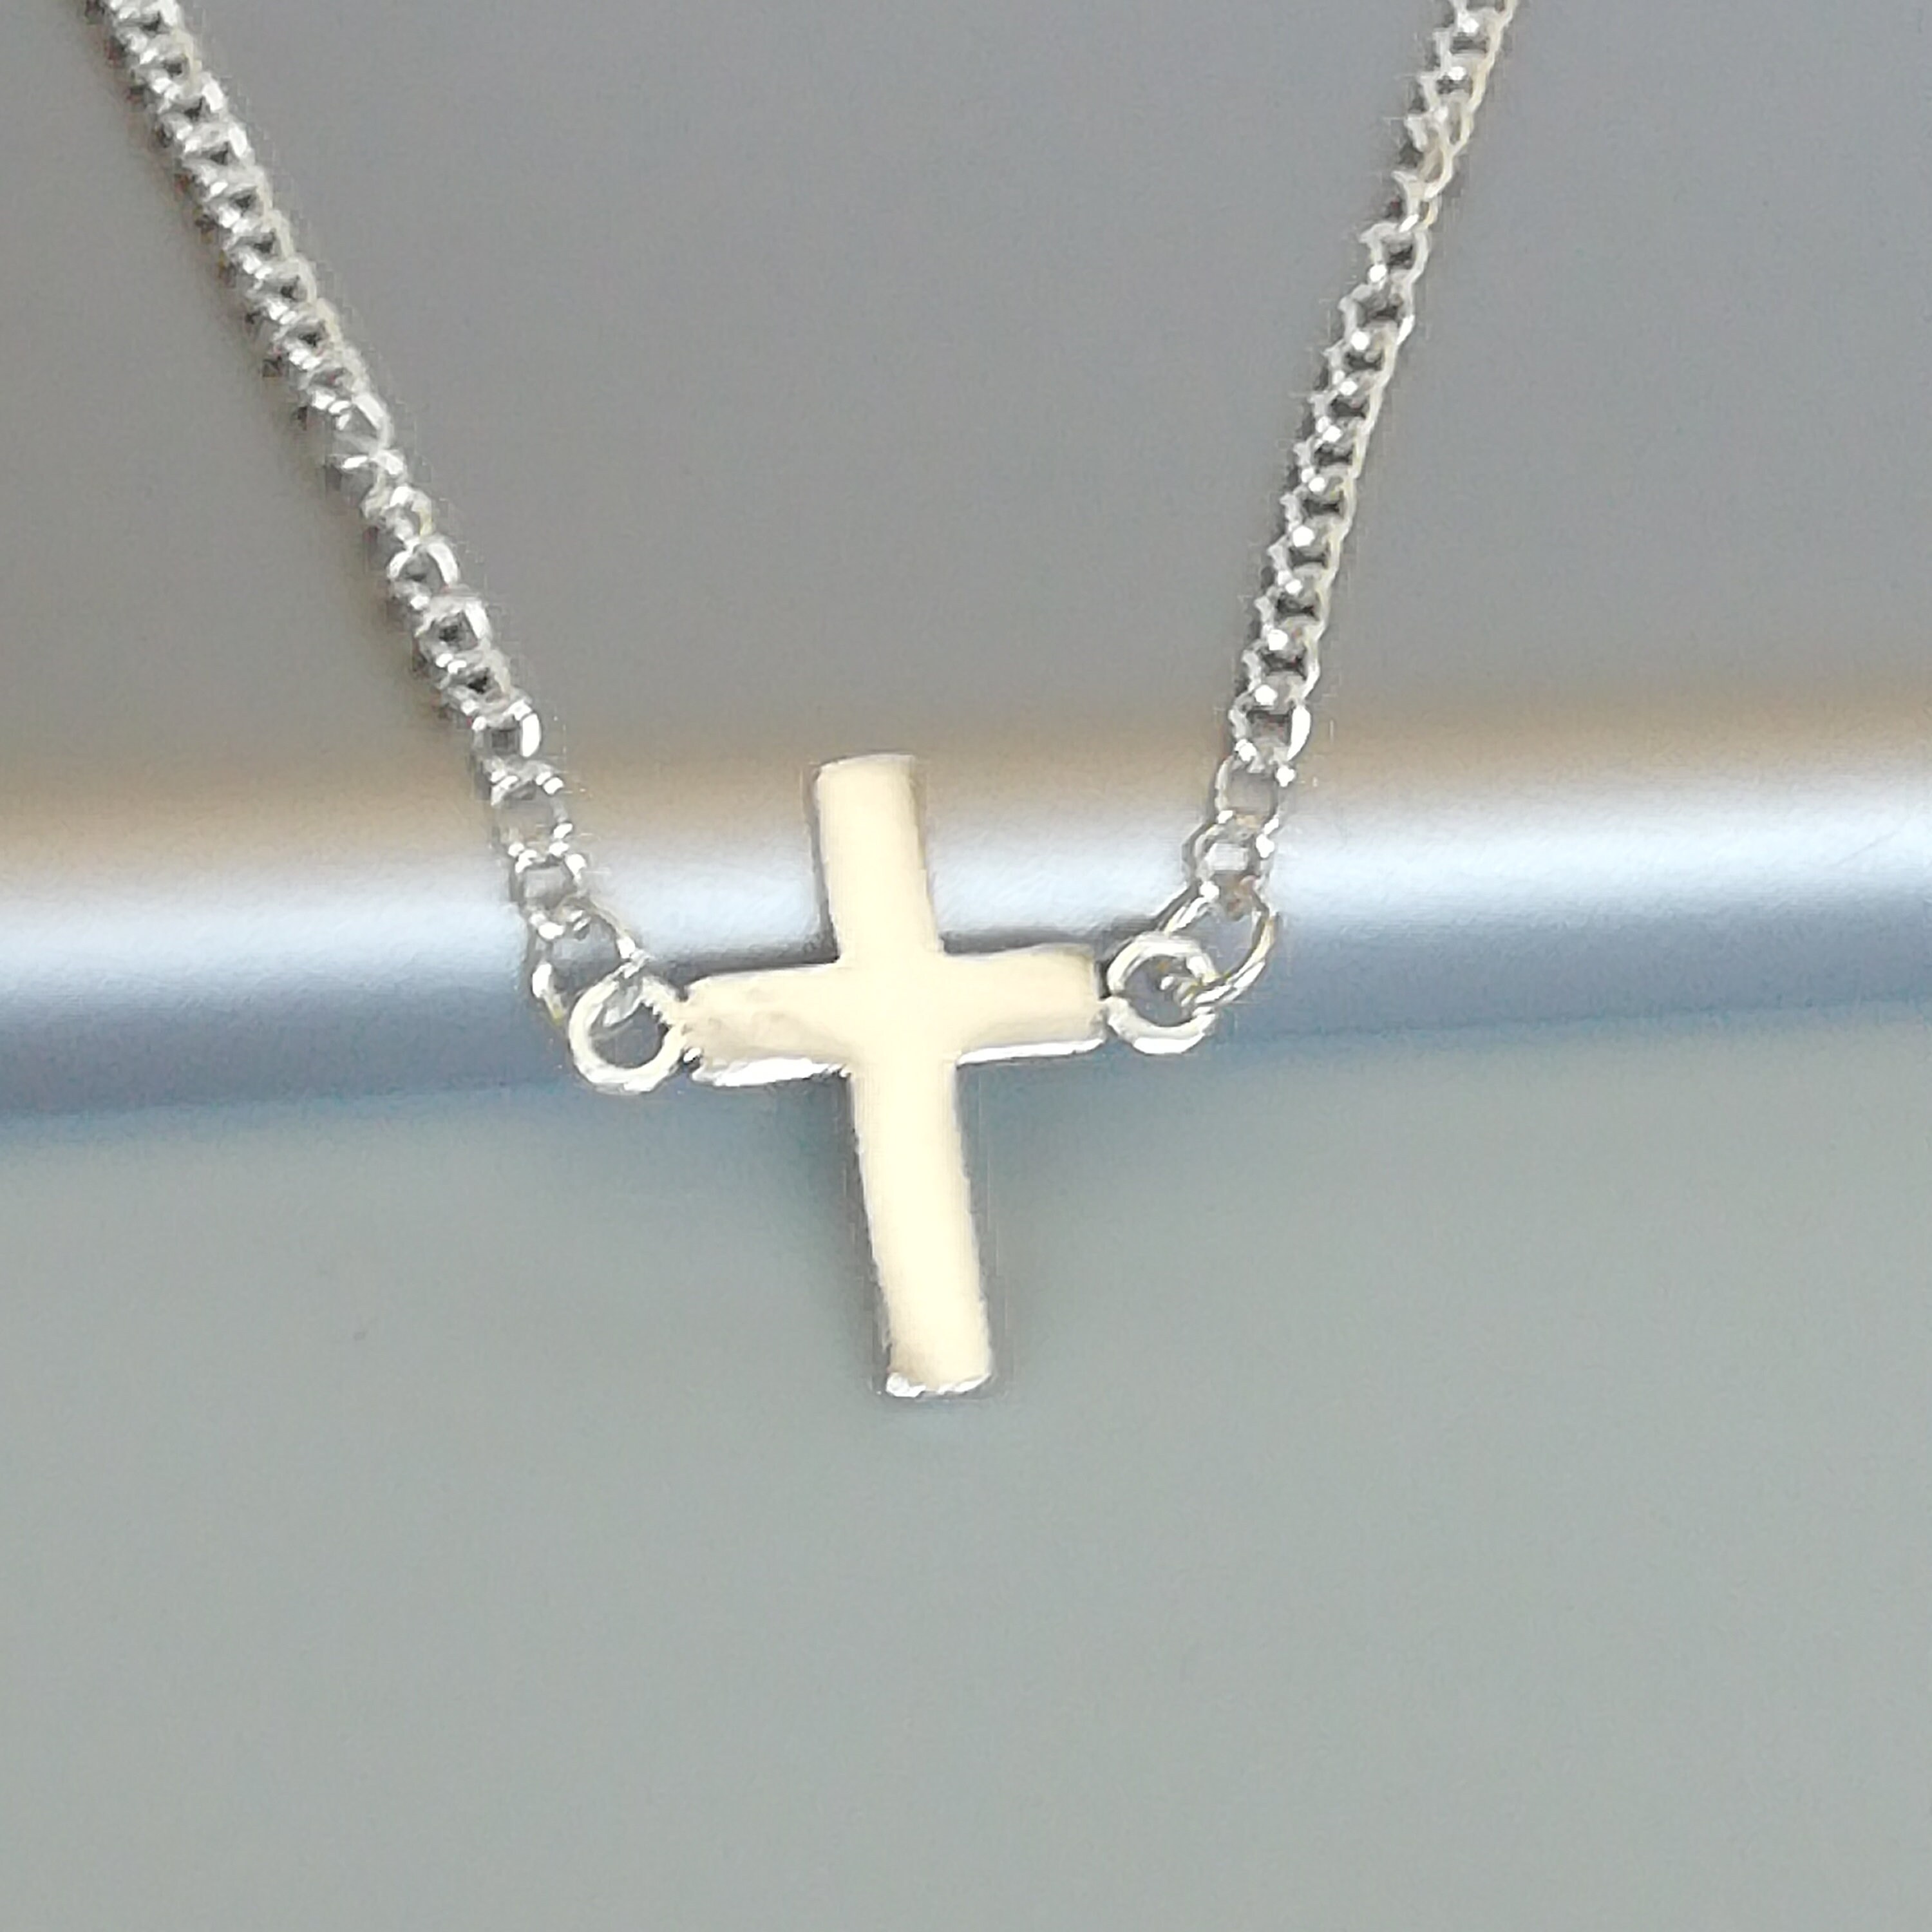 Cross necklace Sterling silver cross charm necklace | Etsy